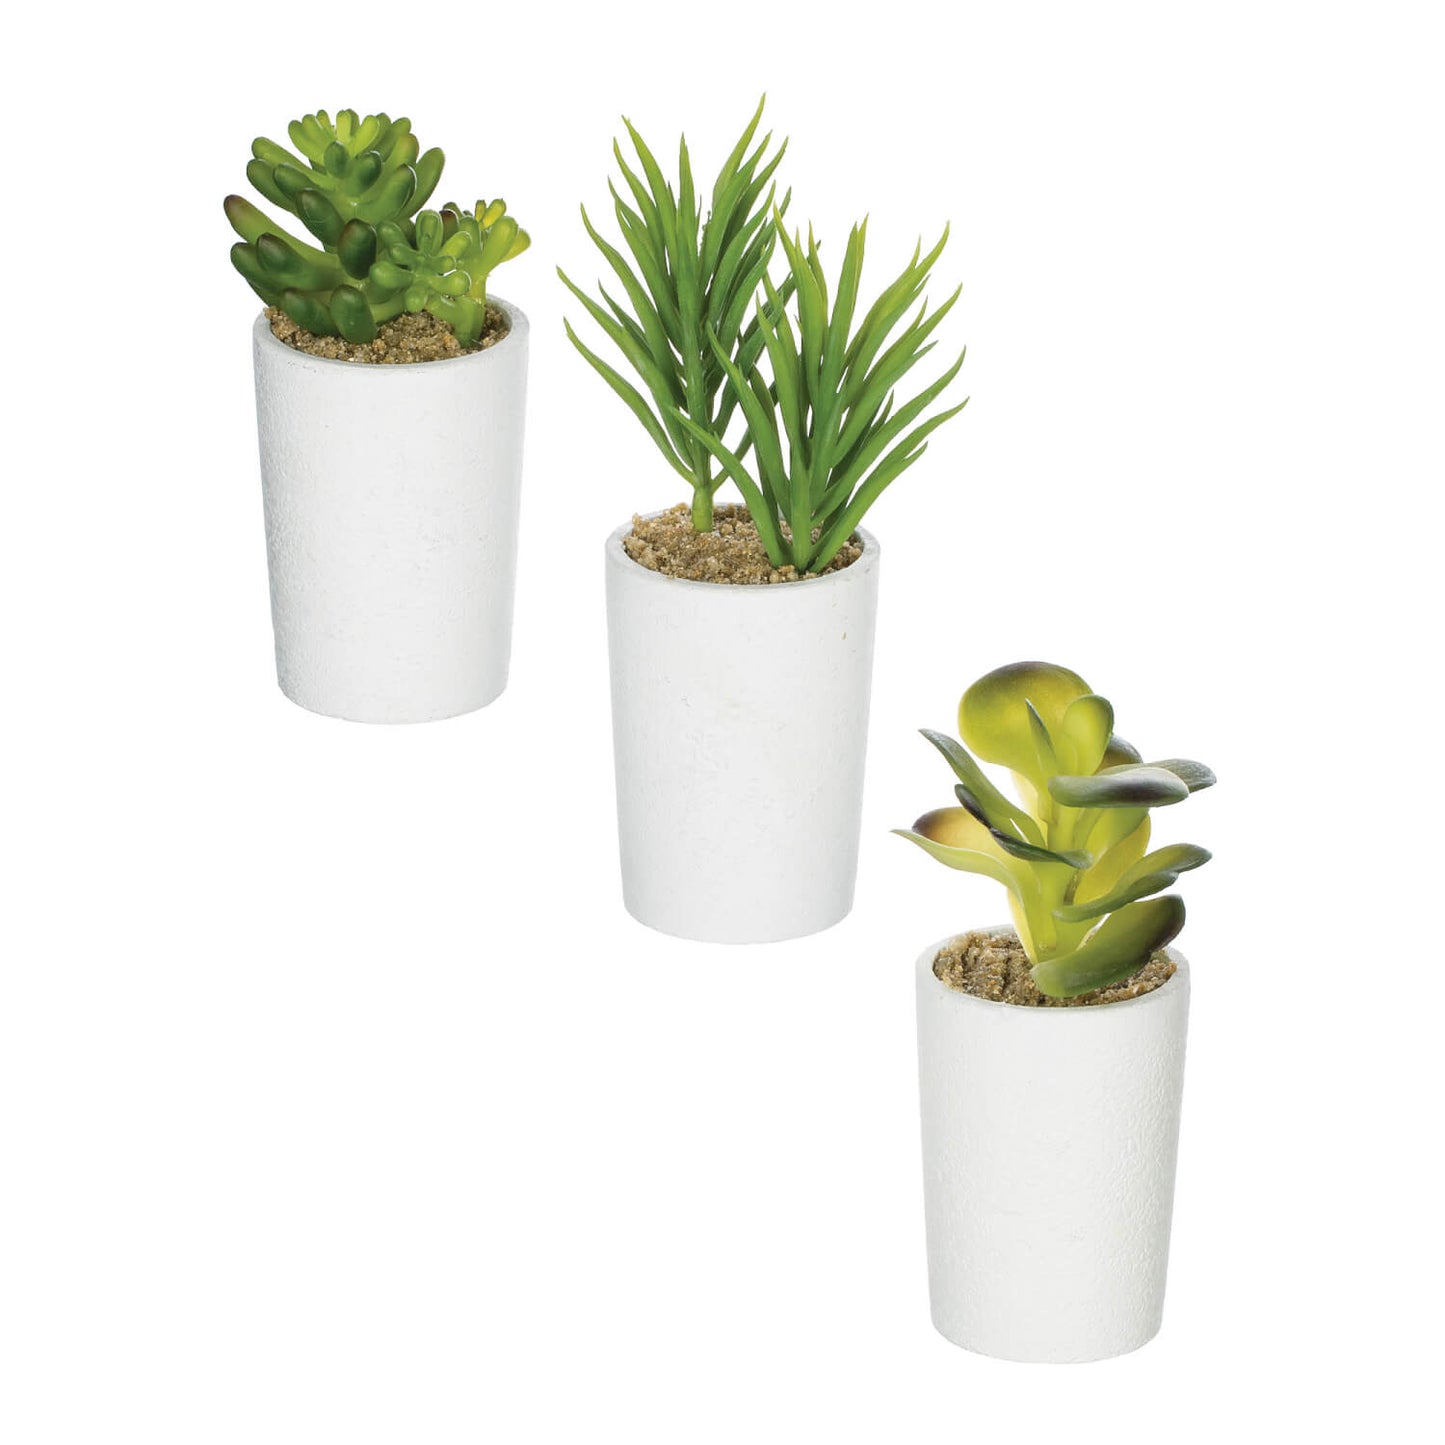 all three styles of mini succulent displayed on a white background